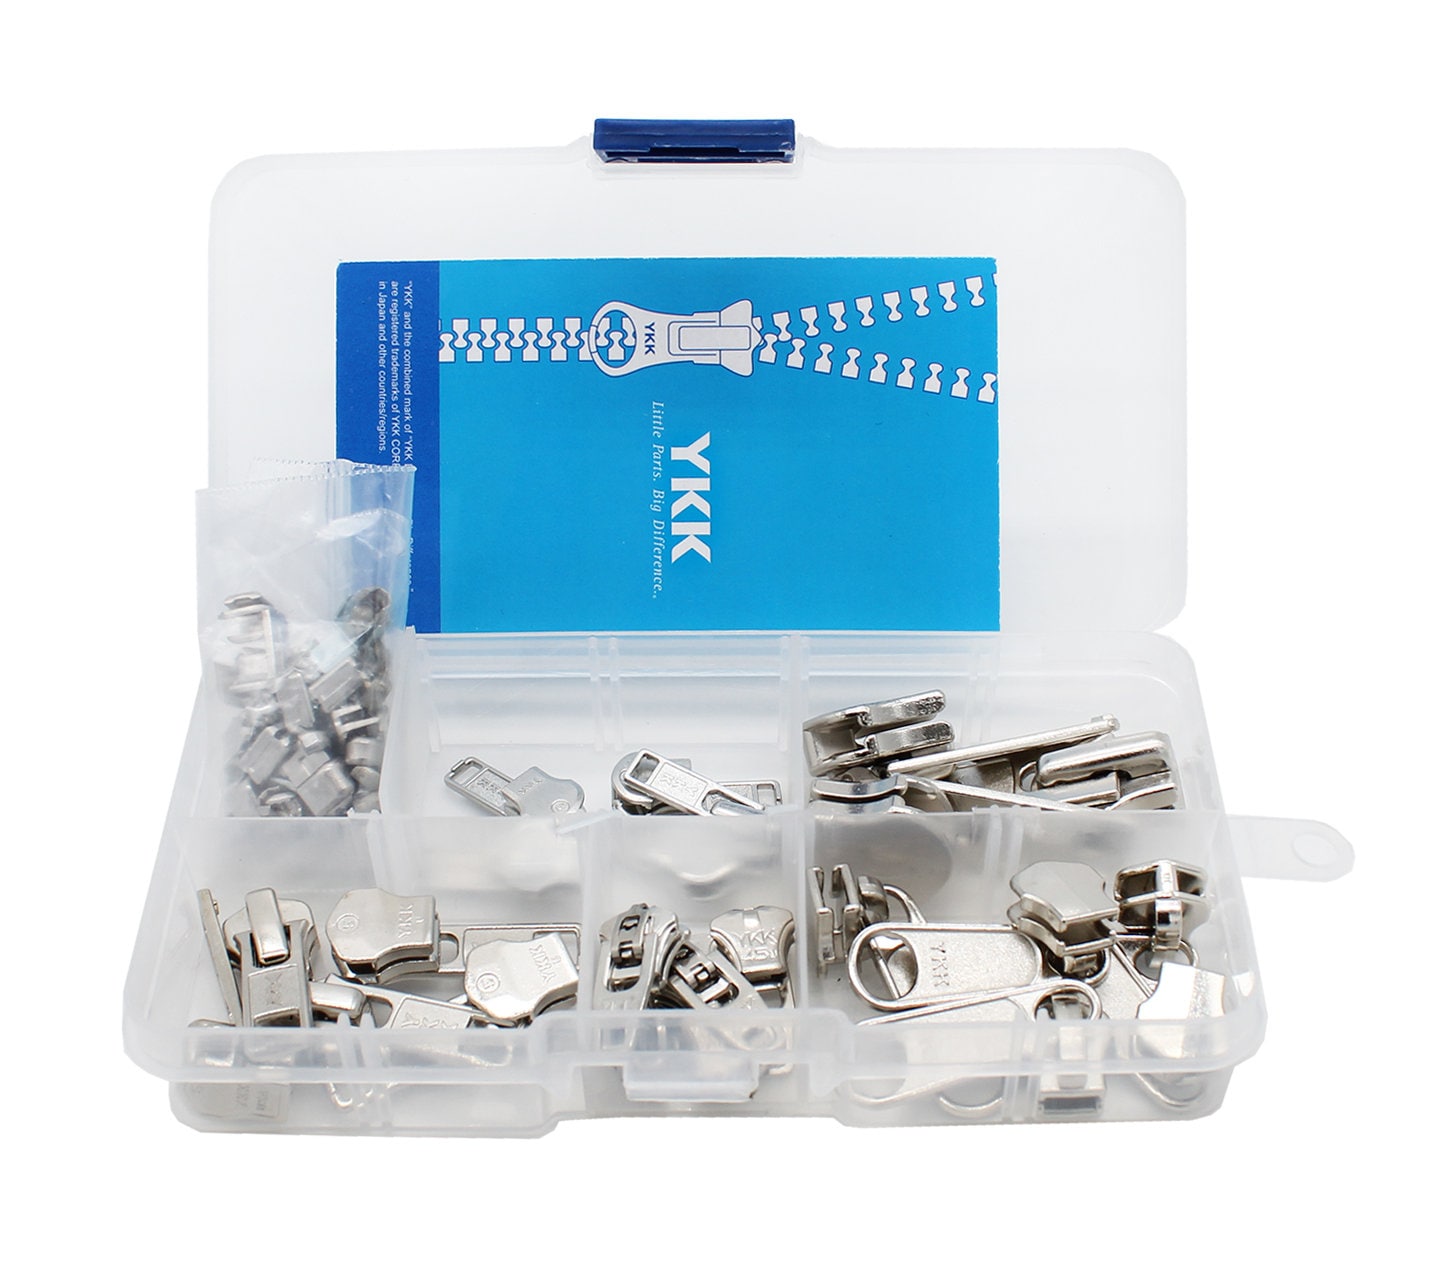  Zipper Repair Kit #5 Sliders with Pull 12 Pcs, Zipper Stops,  Replacement Zipper Head Bottom Stop and Top Stop, Metal Plastic and Nylon  Coil Zippers,Fix Zipper On for Repairing Coats,Jackets,Crafts.